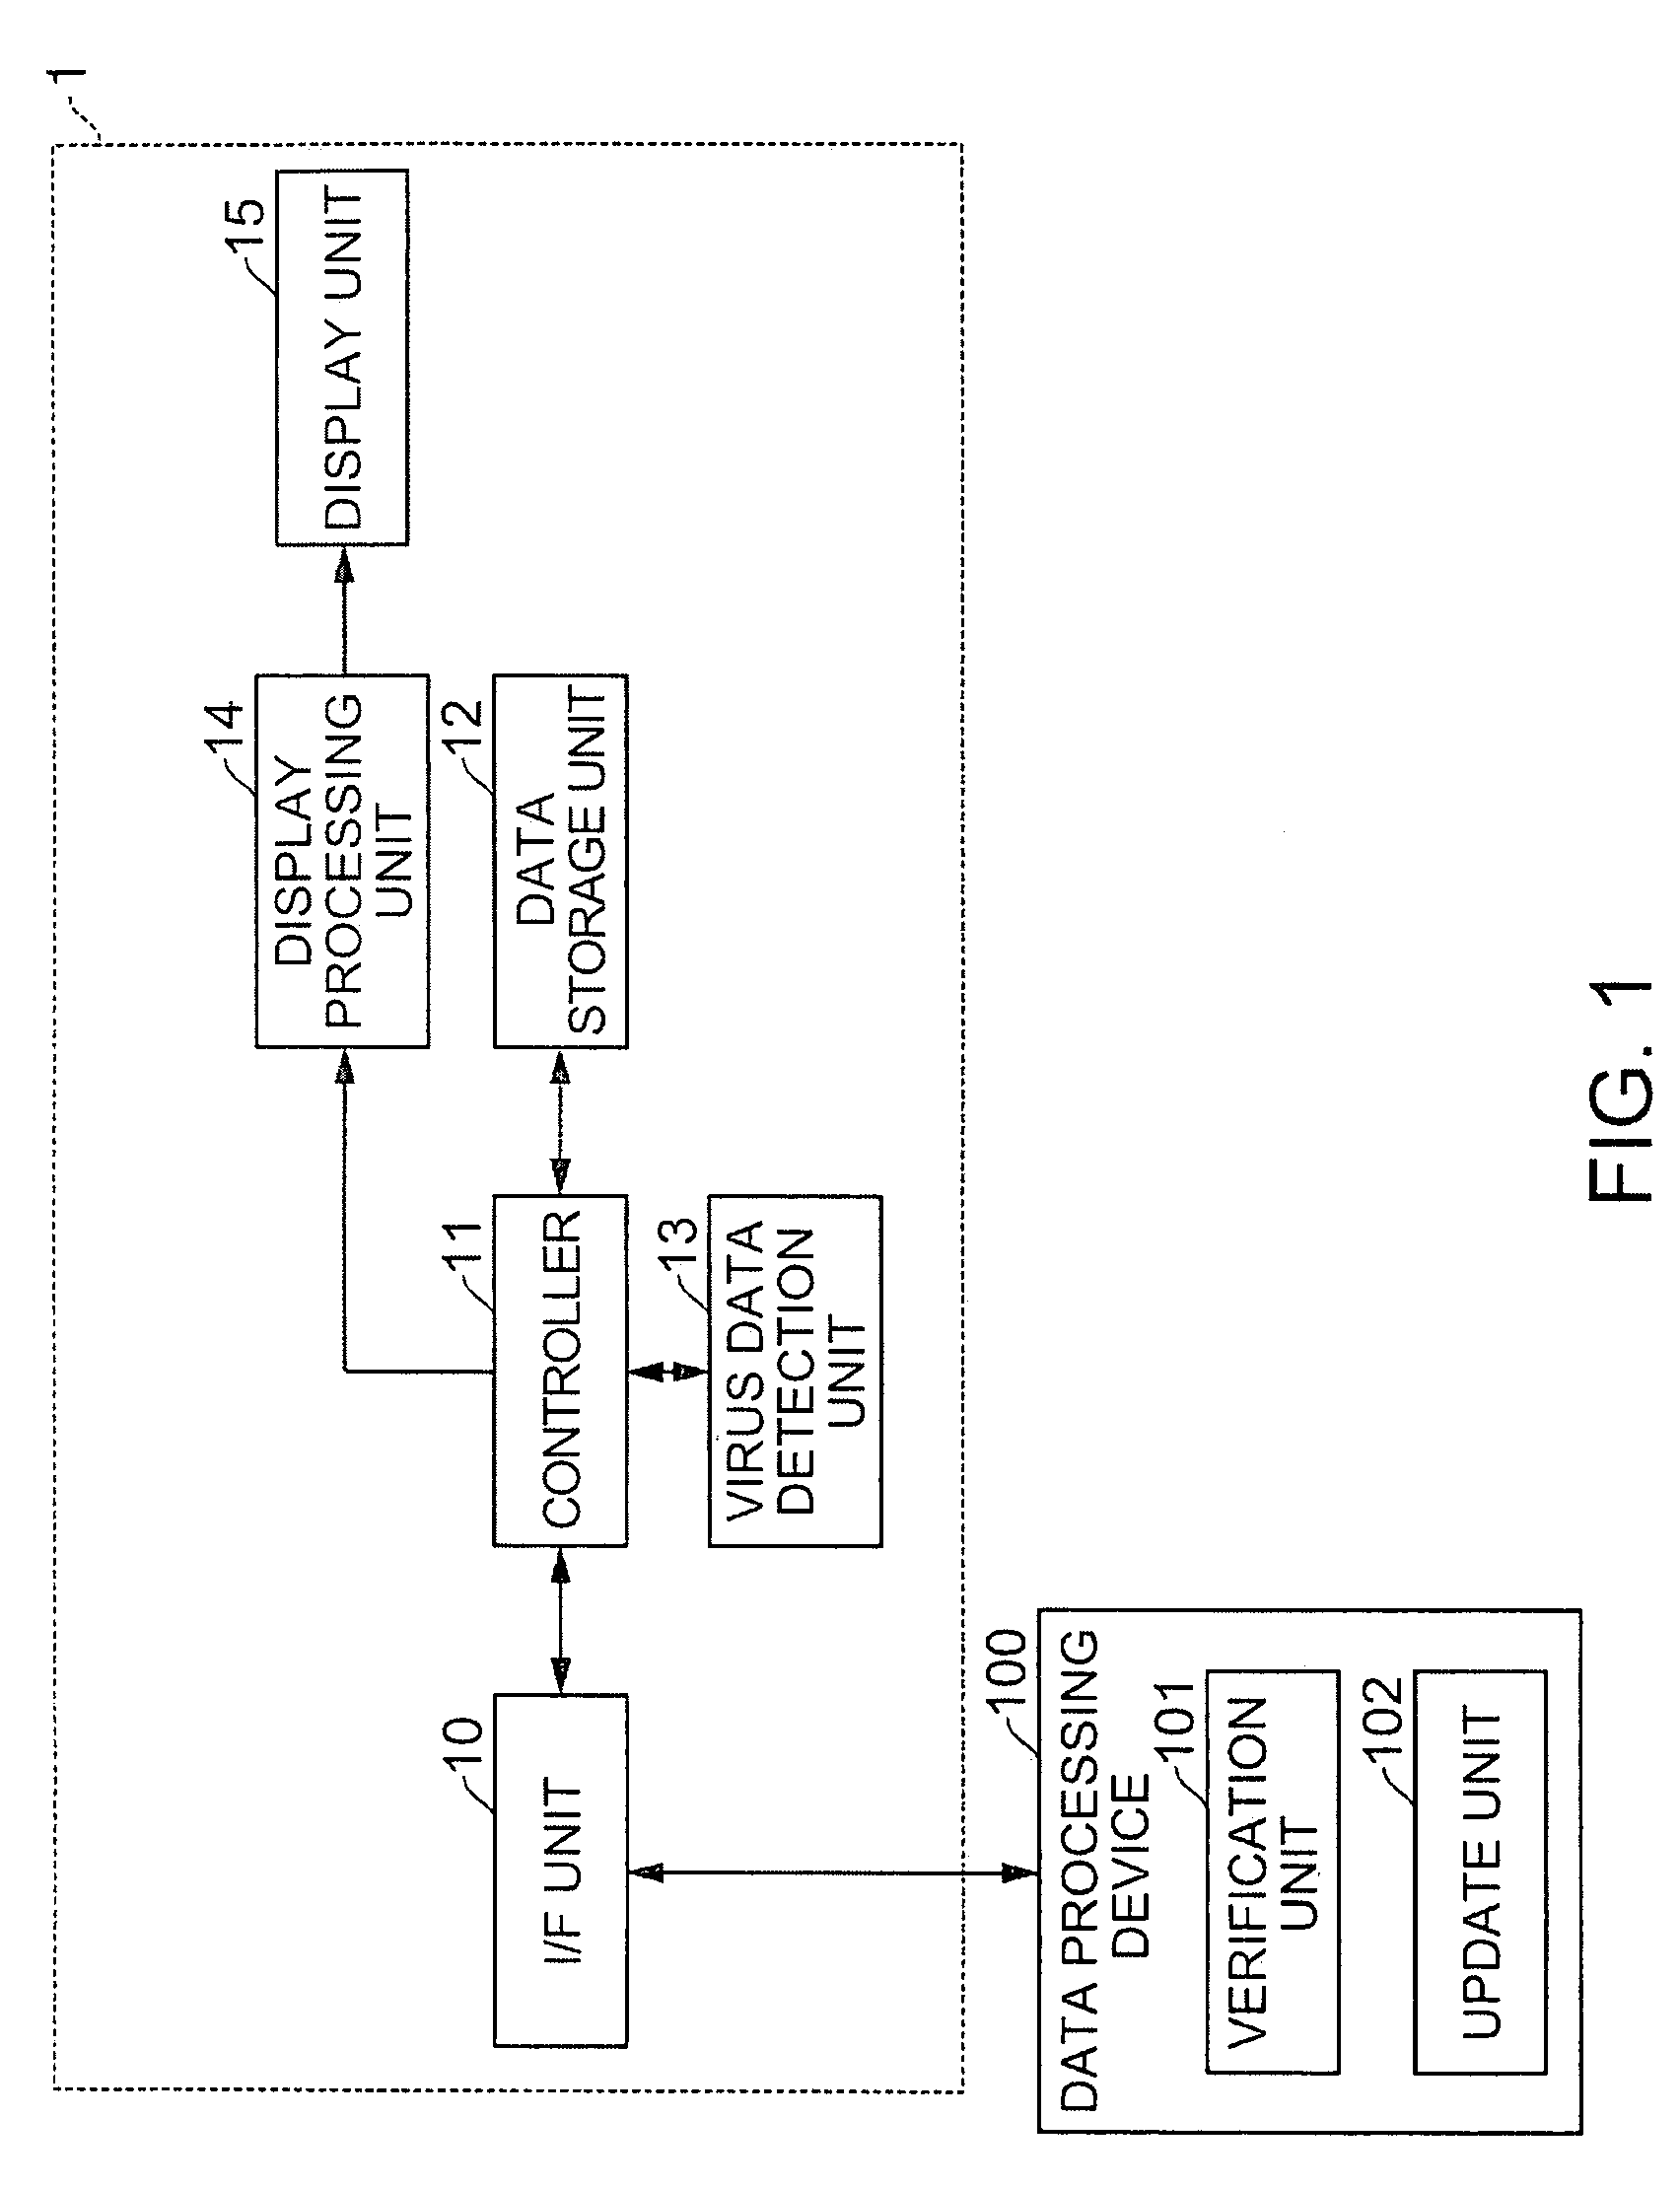 Storage device, data processing device, data processing system, and program